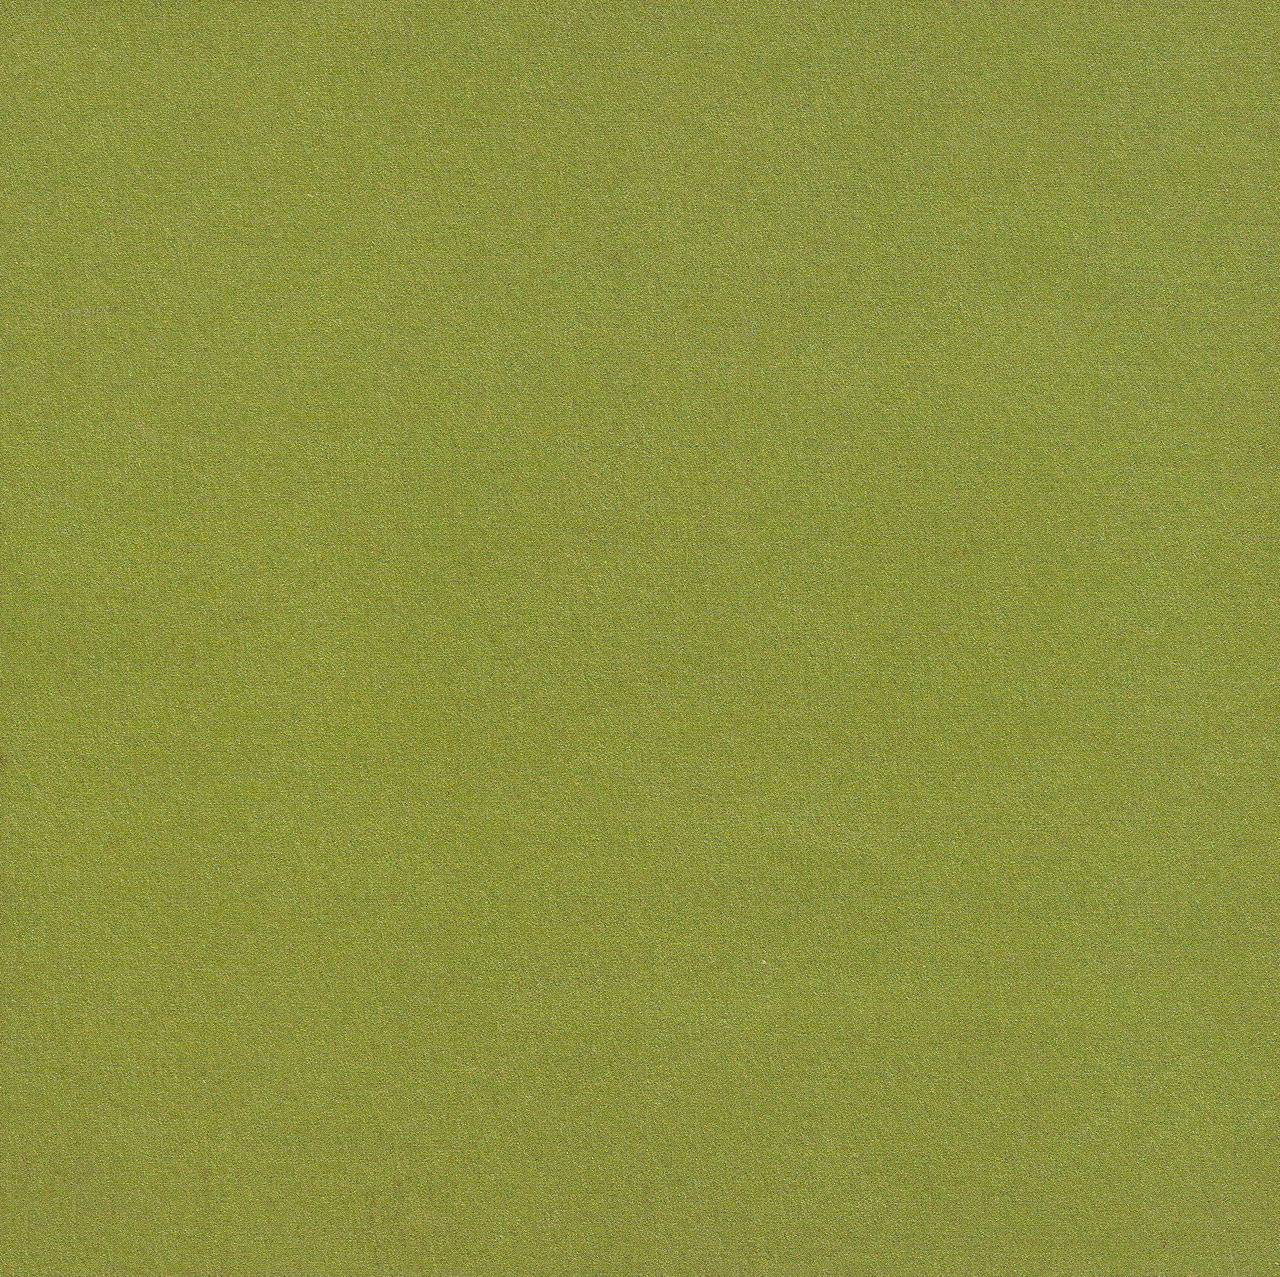 Olive Green Paper Background By Enchantedgal Stock